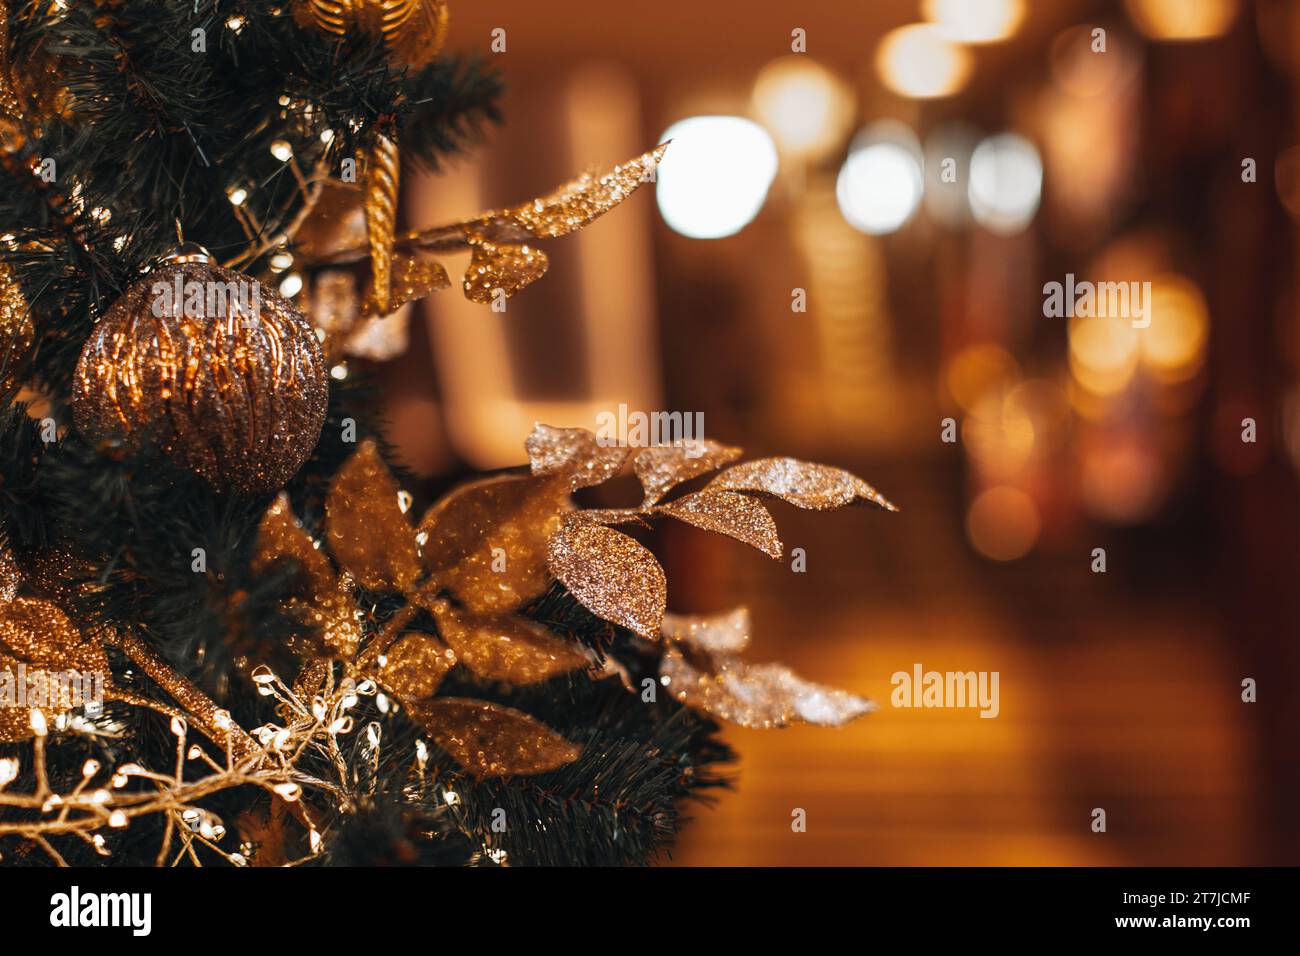 New Year composition in a festive interior. A branch of the Christmas tree decorated with a golden plant leaves, Christmas ball and garlands light. Stock Photo